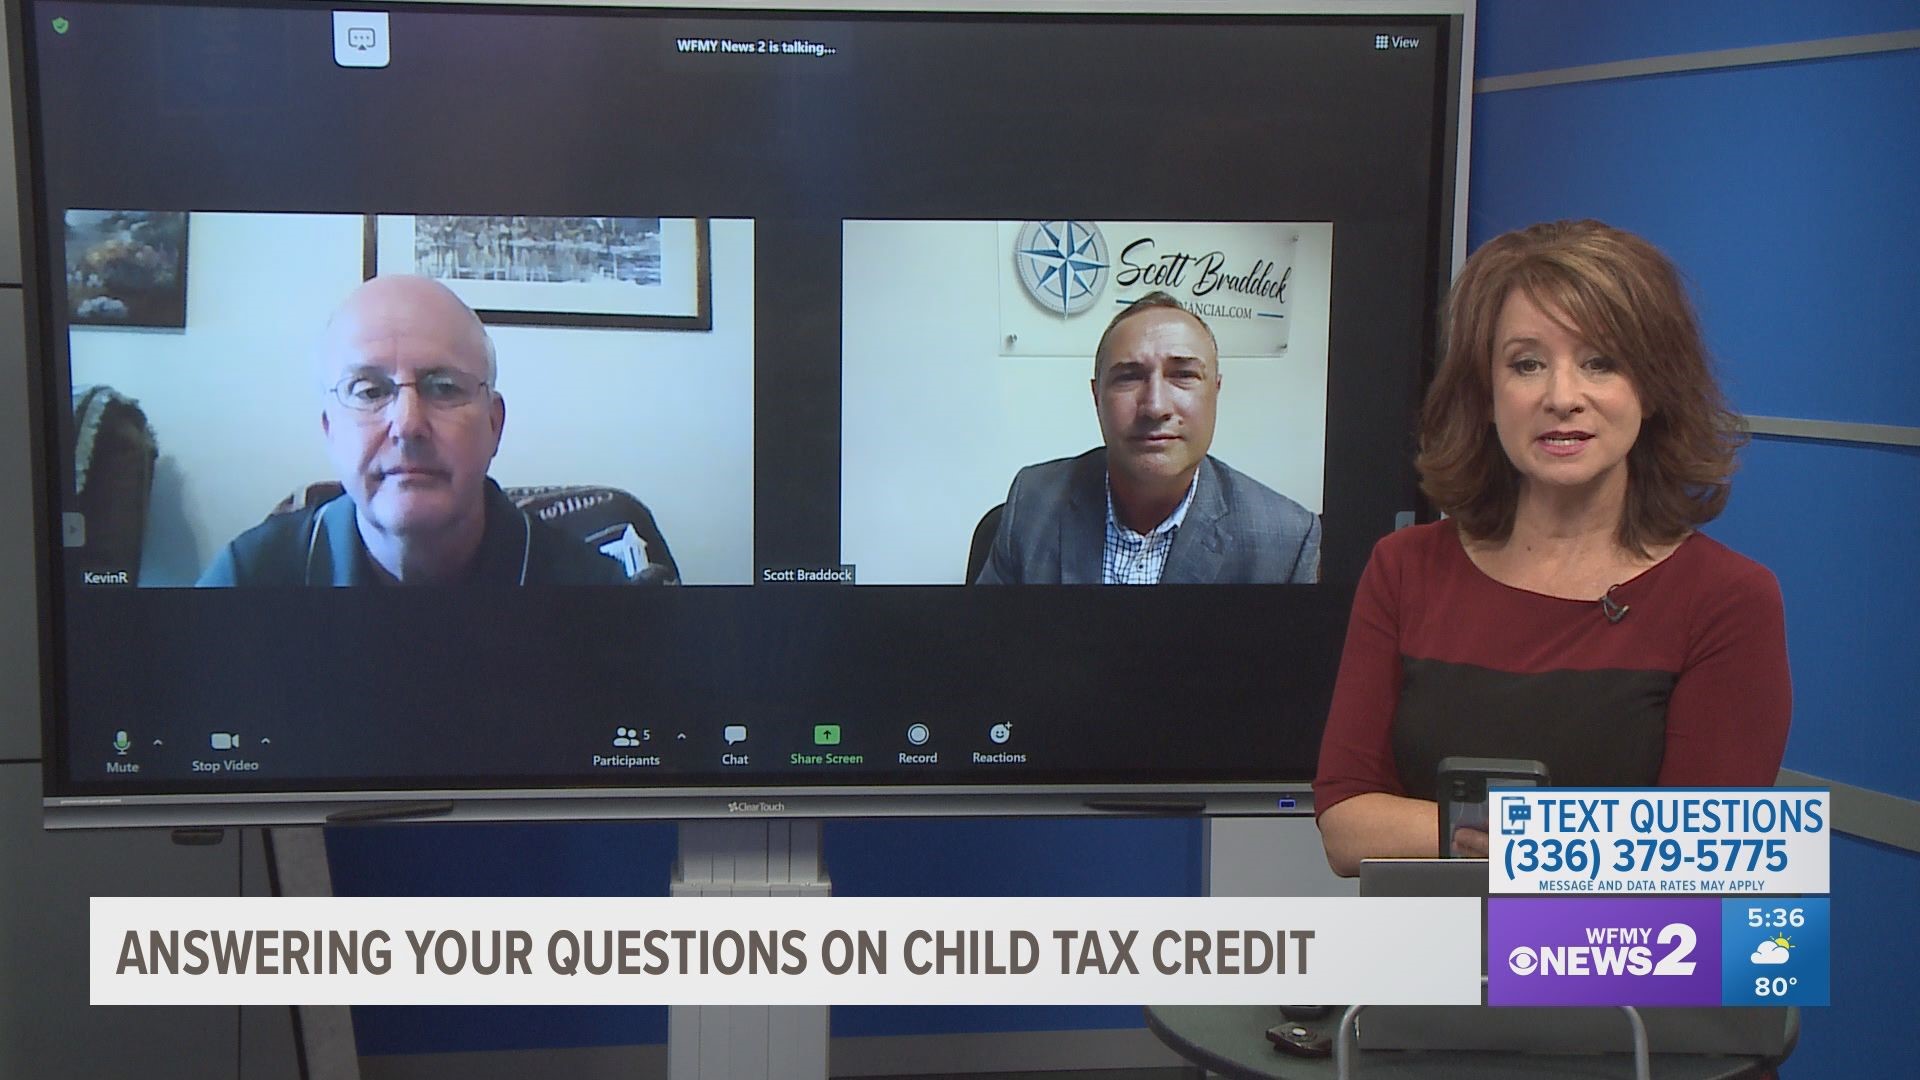 Our experts answer your questions on the child tax credit.